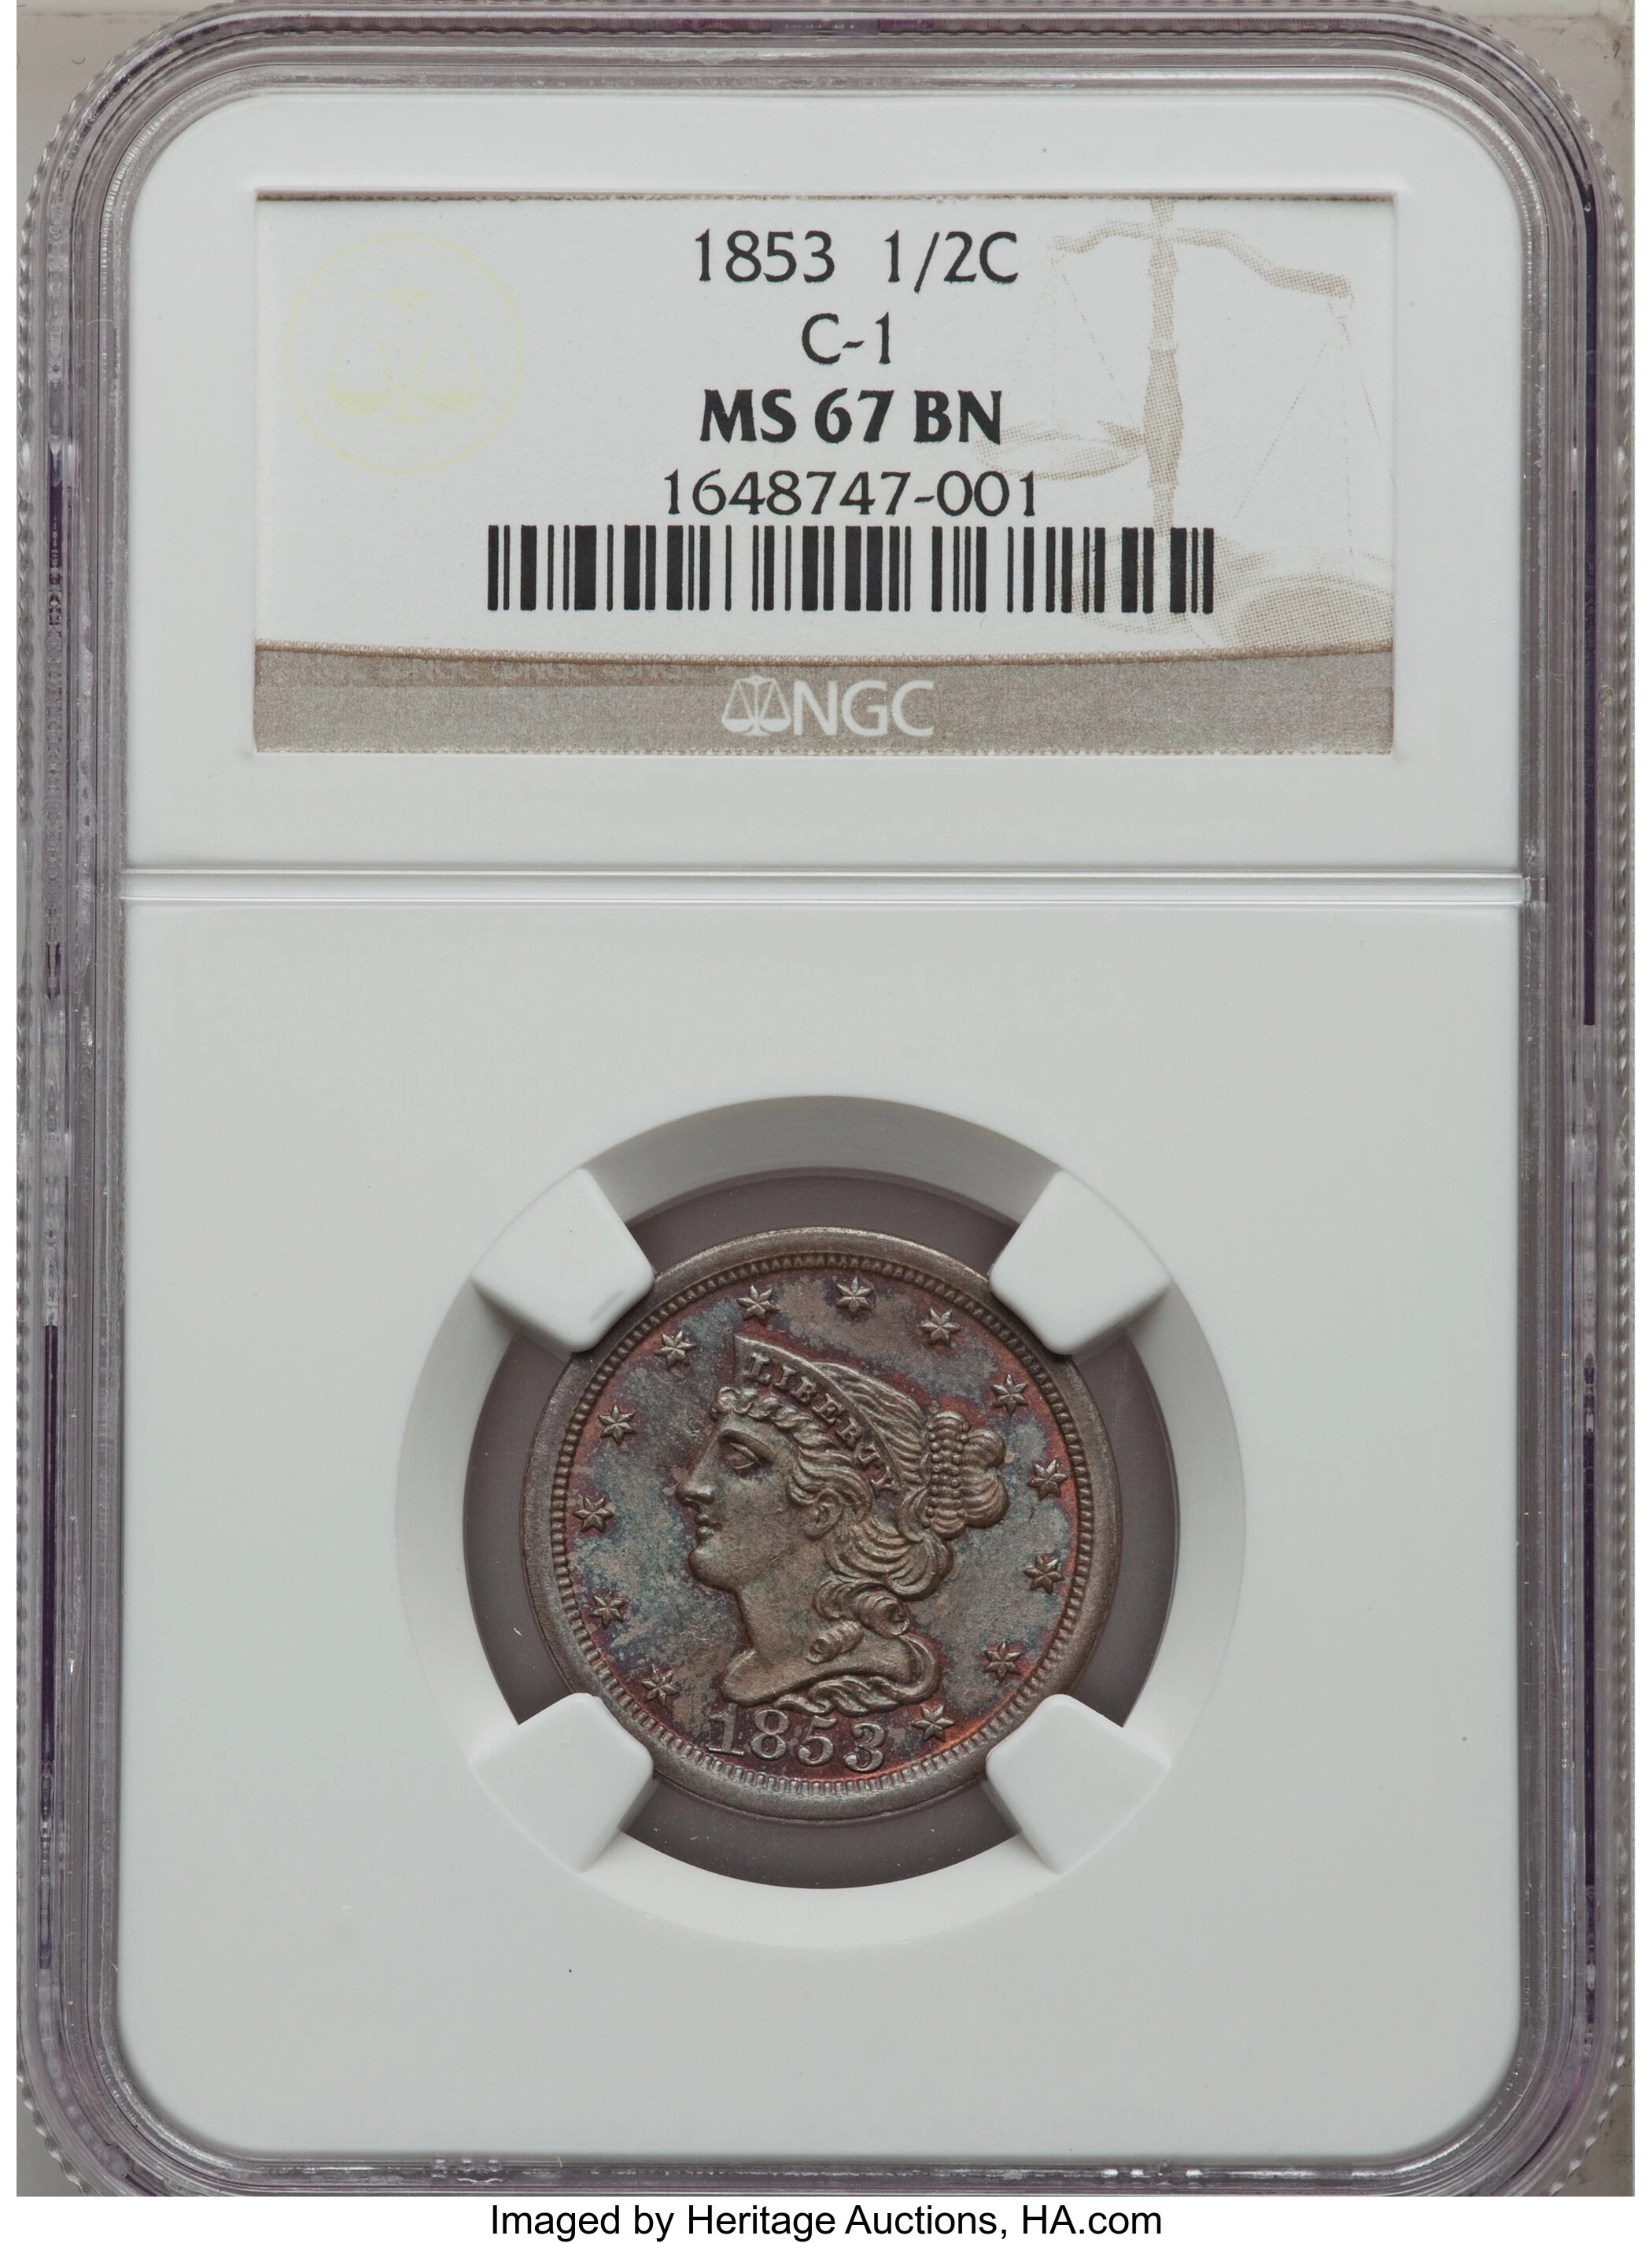 1853 Braided Hair Half Penny BN Coin Pricing Guide